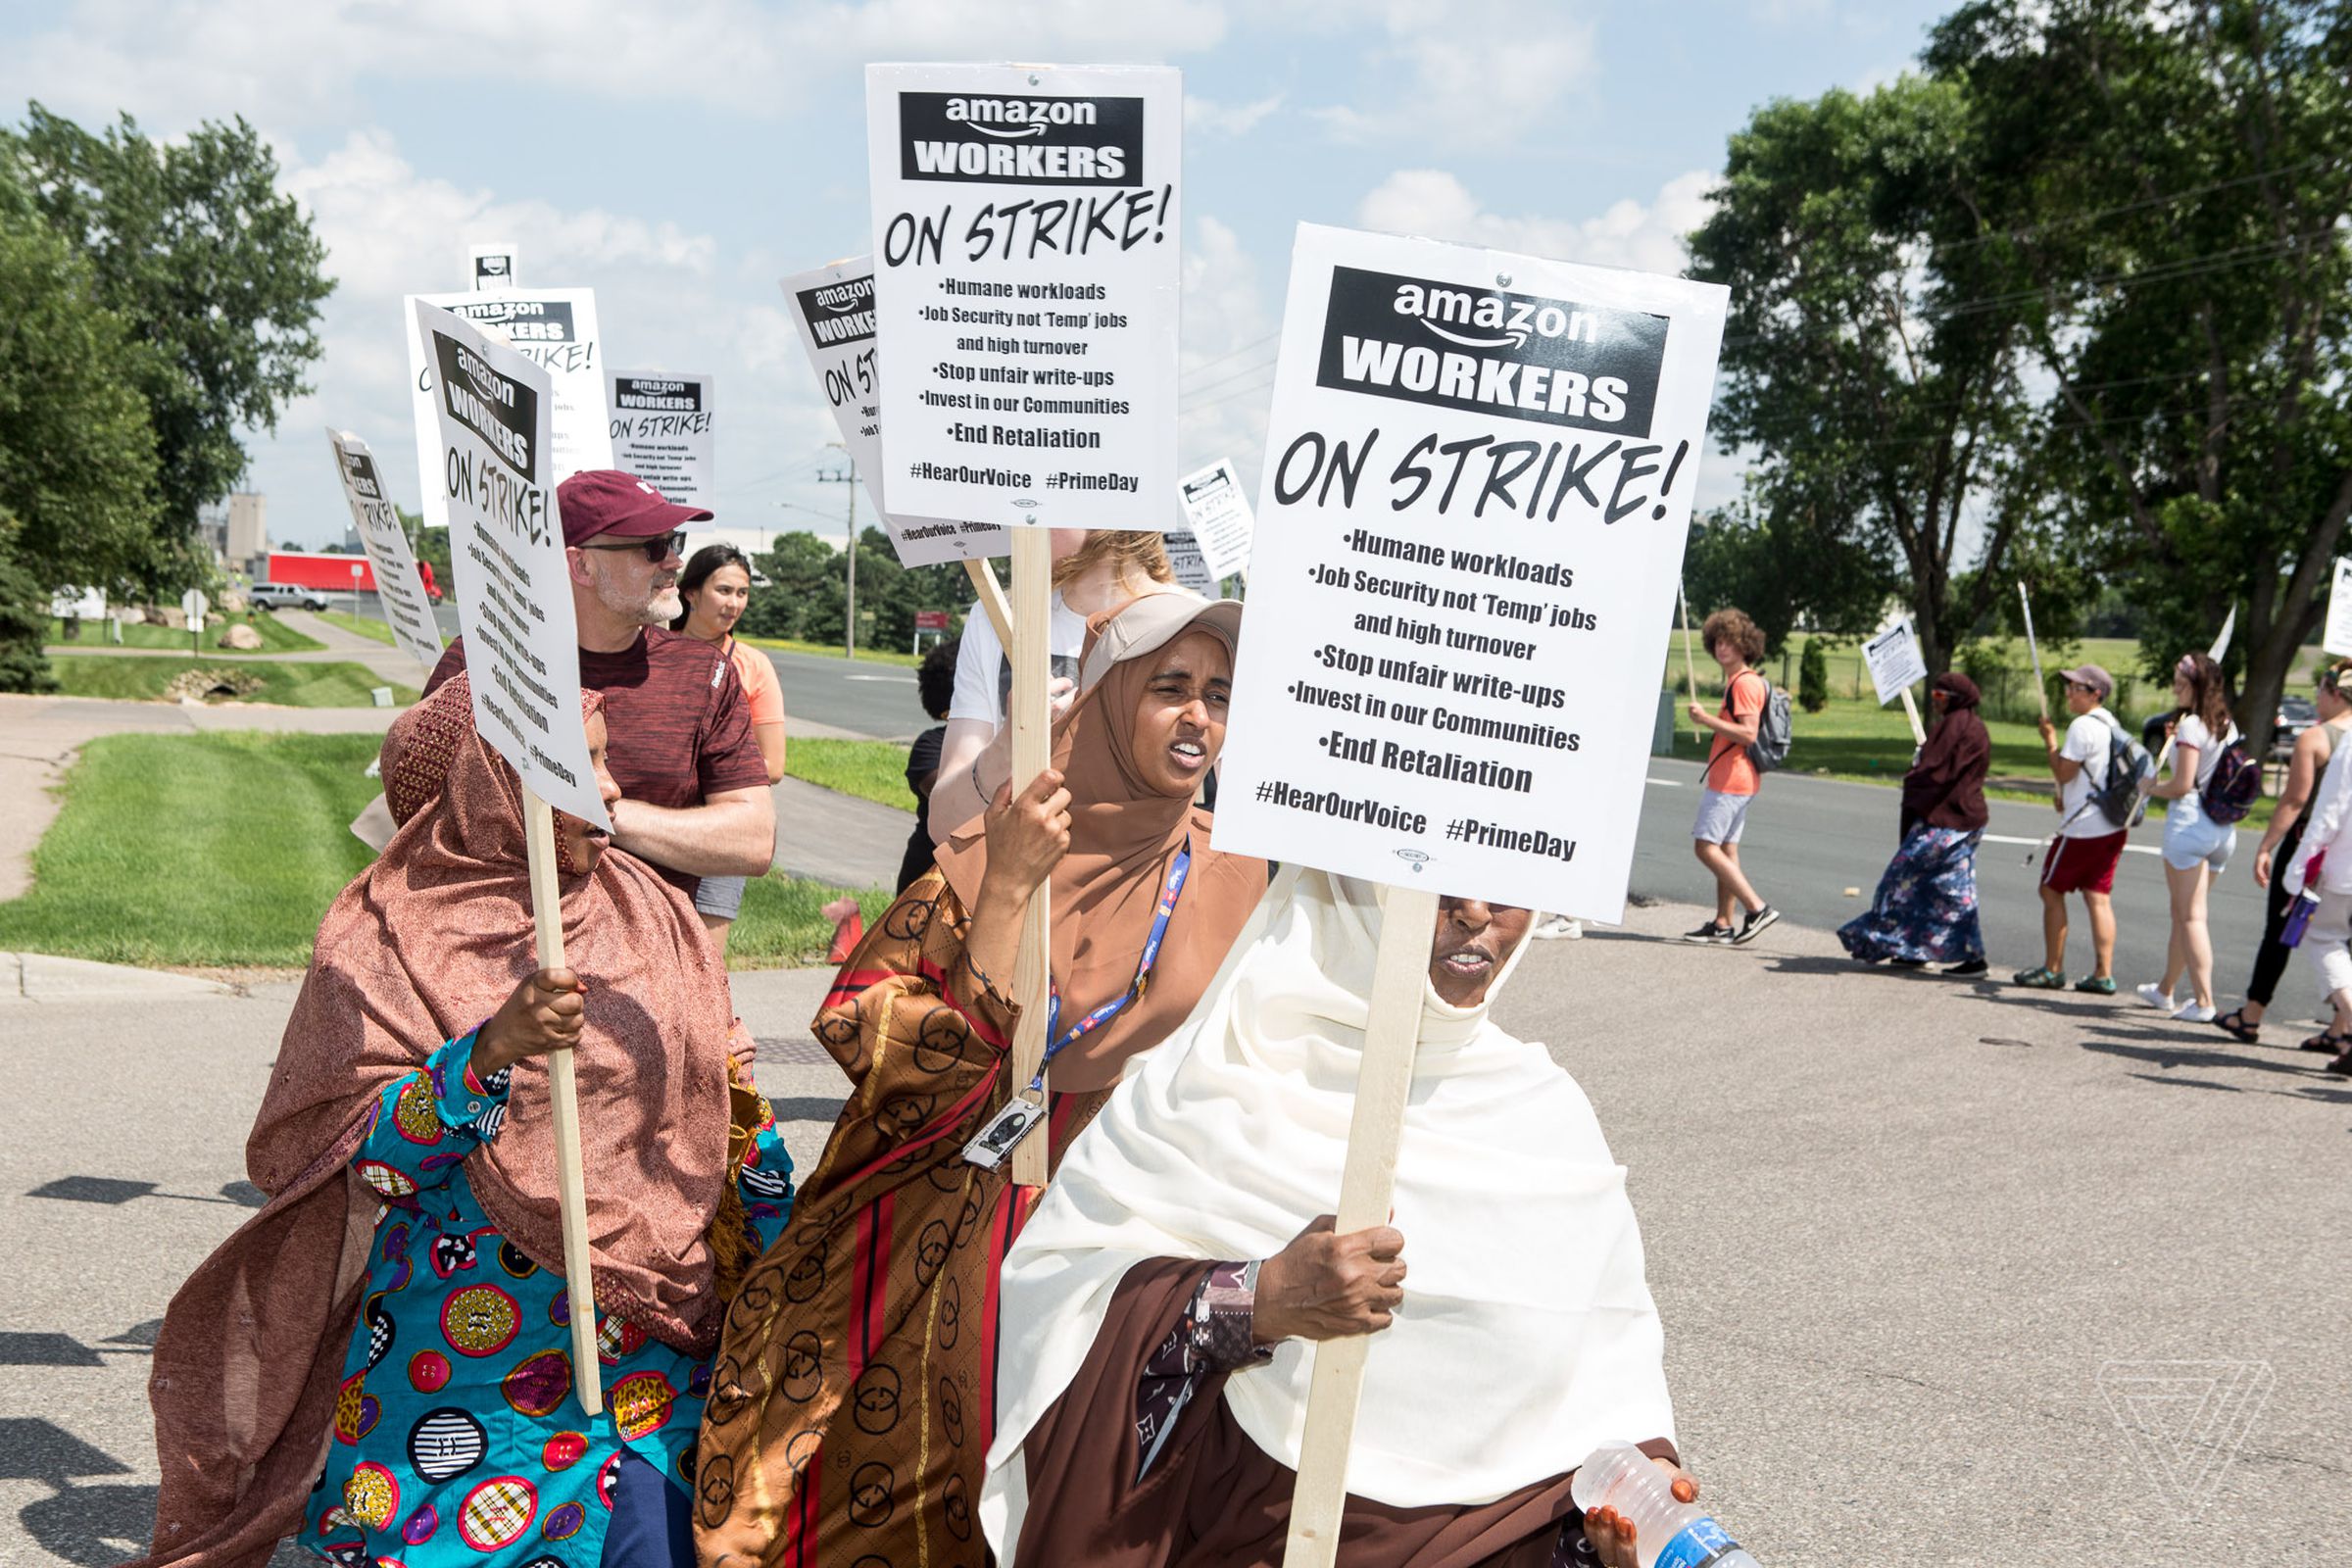 Amazon workers, including Hibaq Mohamed (center), and their supporters protest outside of the Amazon Fulfillment Center on Prime Day in Shakopee, Minn.